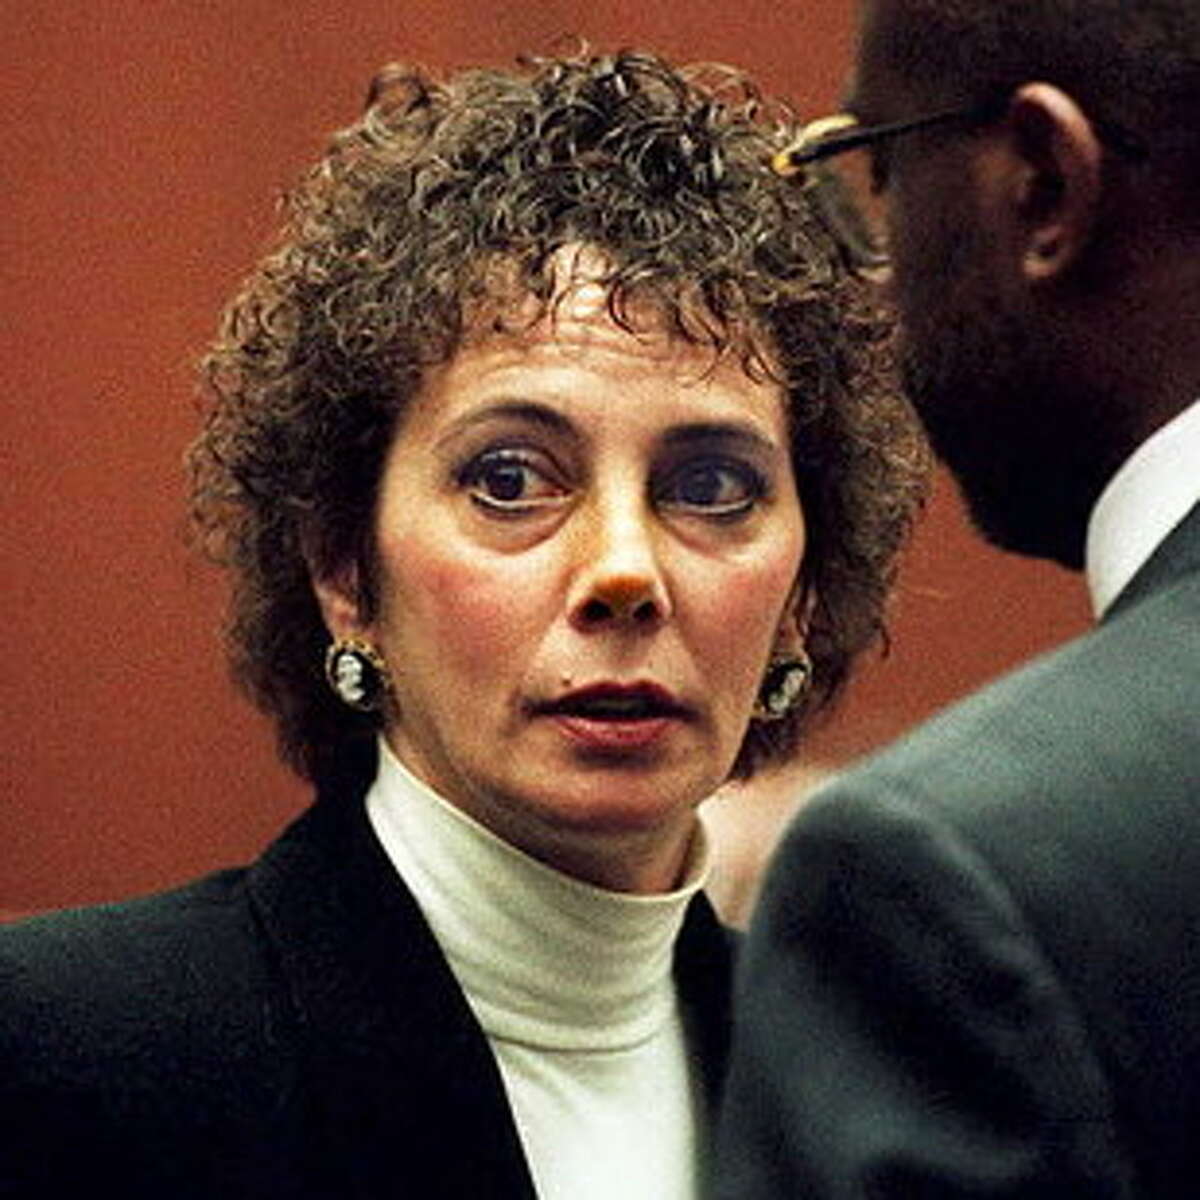 2. Marcia Clark, the prosecutor in O.J. Simpson murder case, carried a gun for protection in the high-profile O.J. Simpson murder trial.